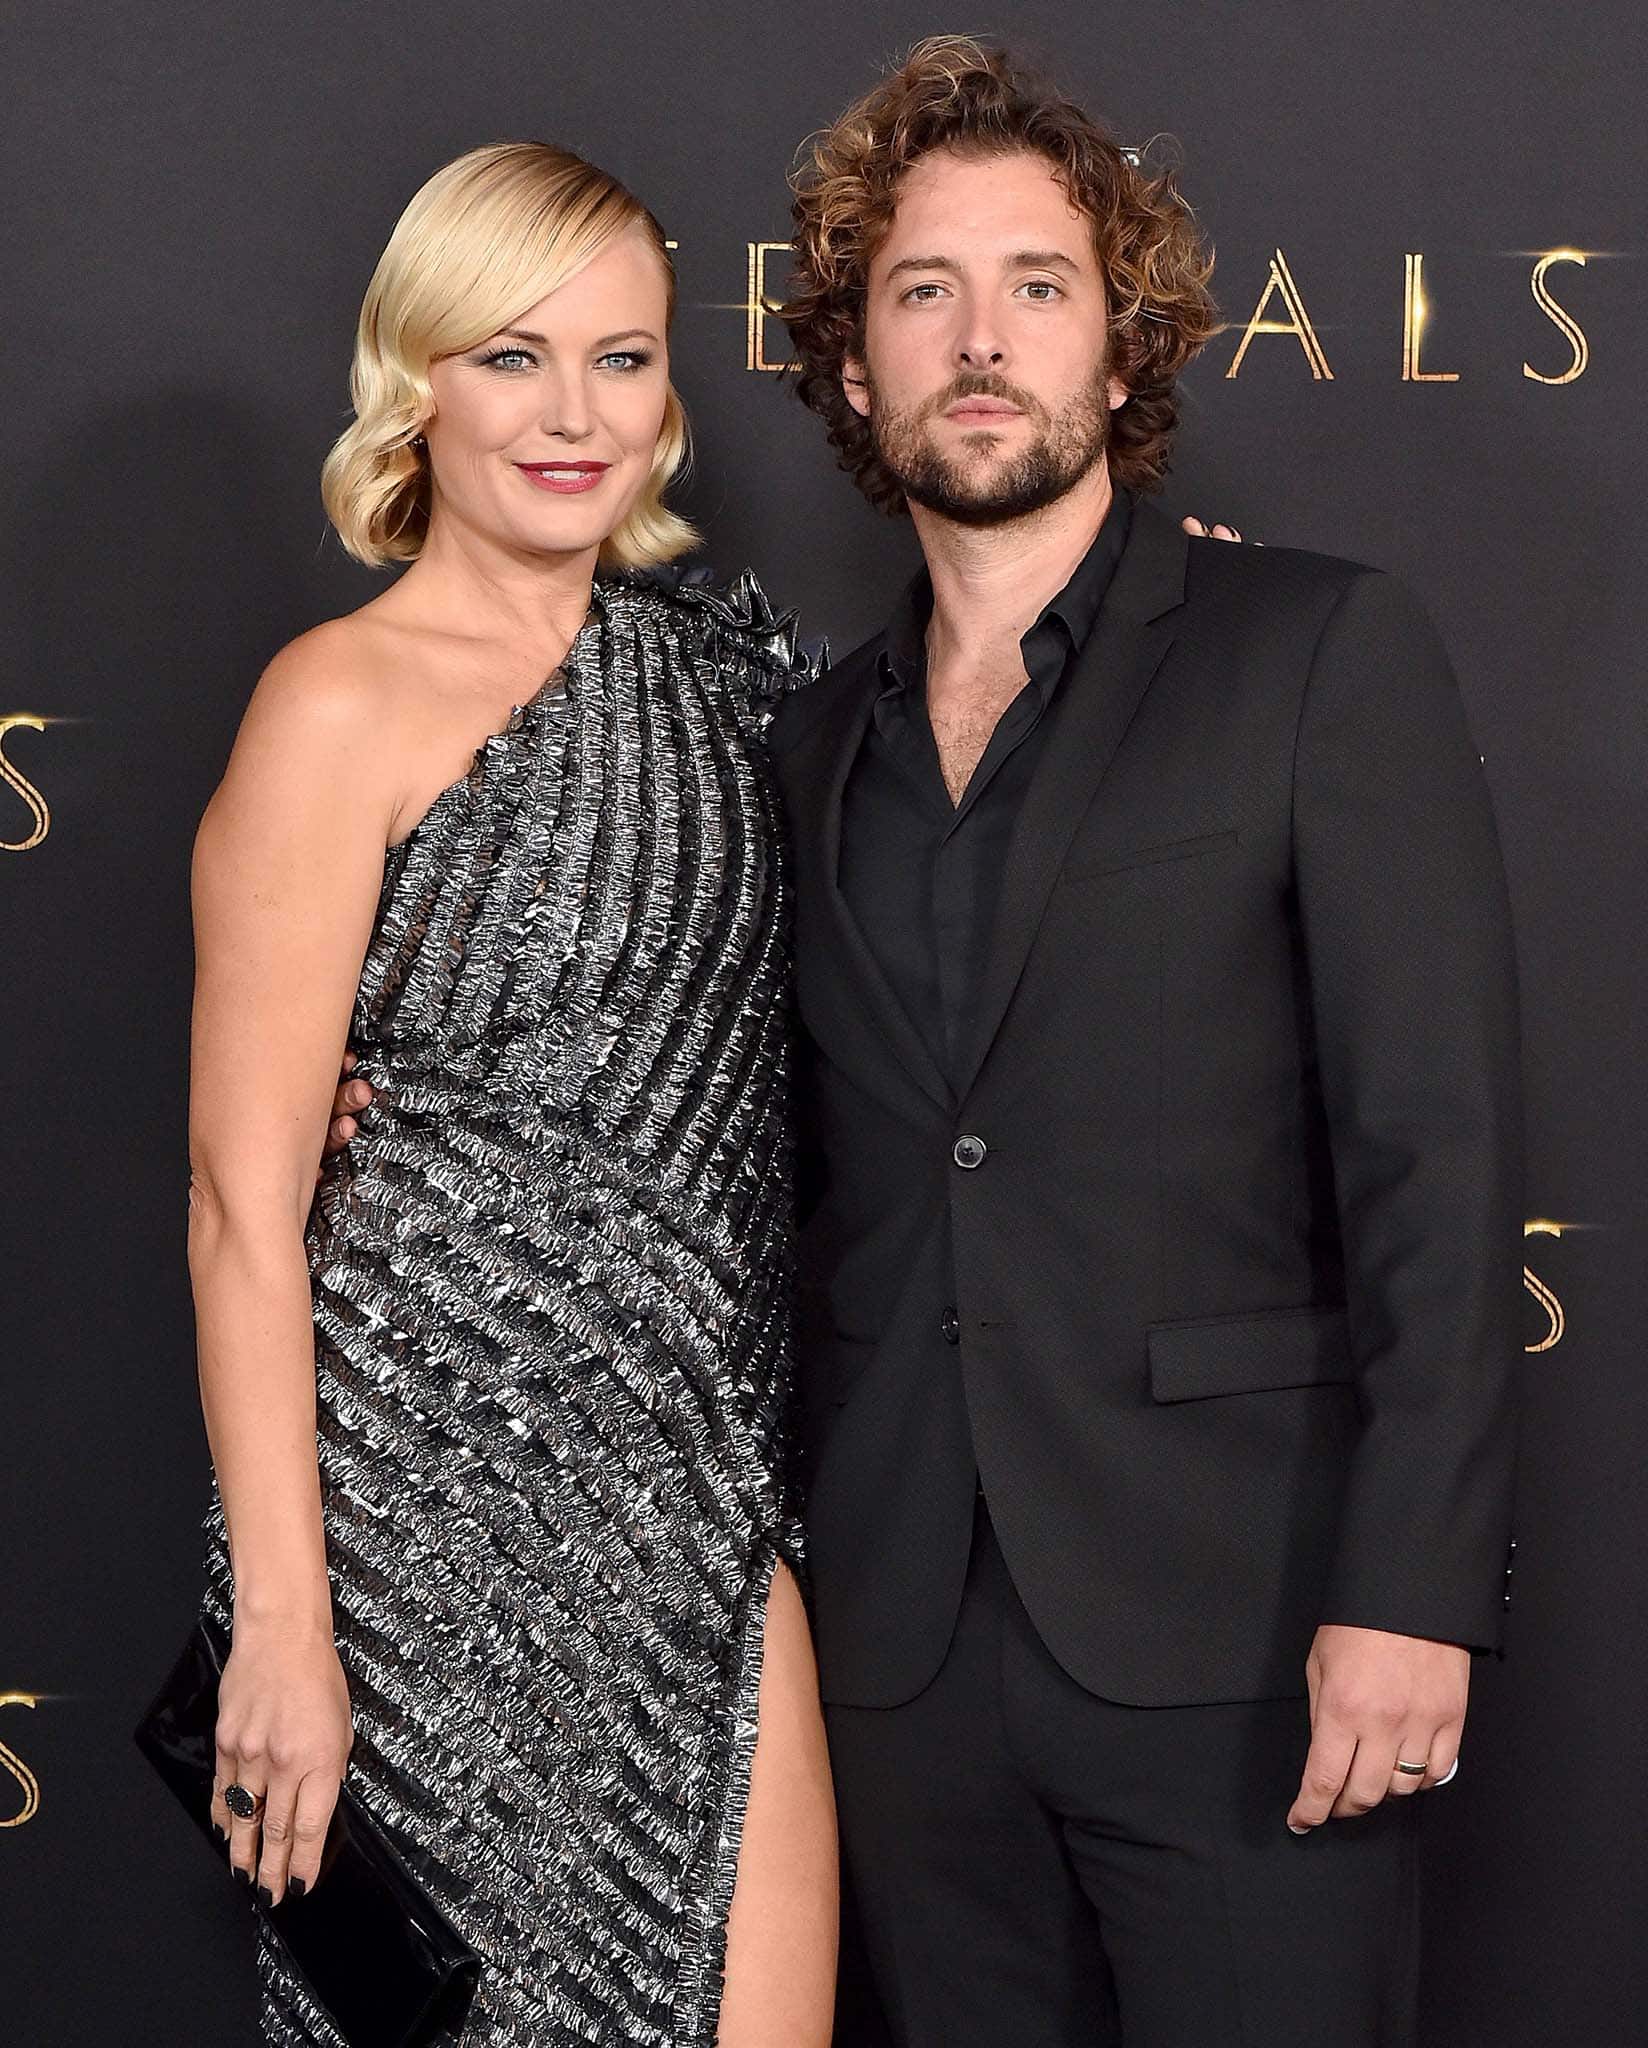 Malin Akerman opts for a sparkly futuristic dress, while her husband Jack Donnelly dons a classic all-black suit